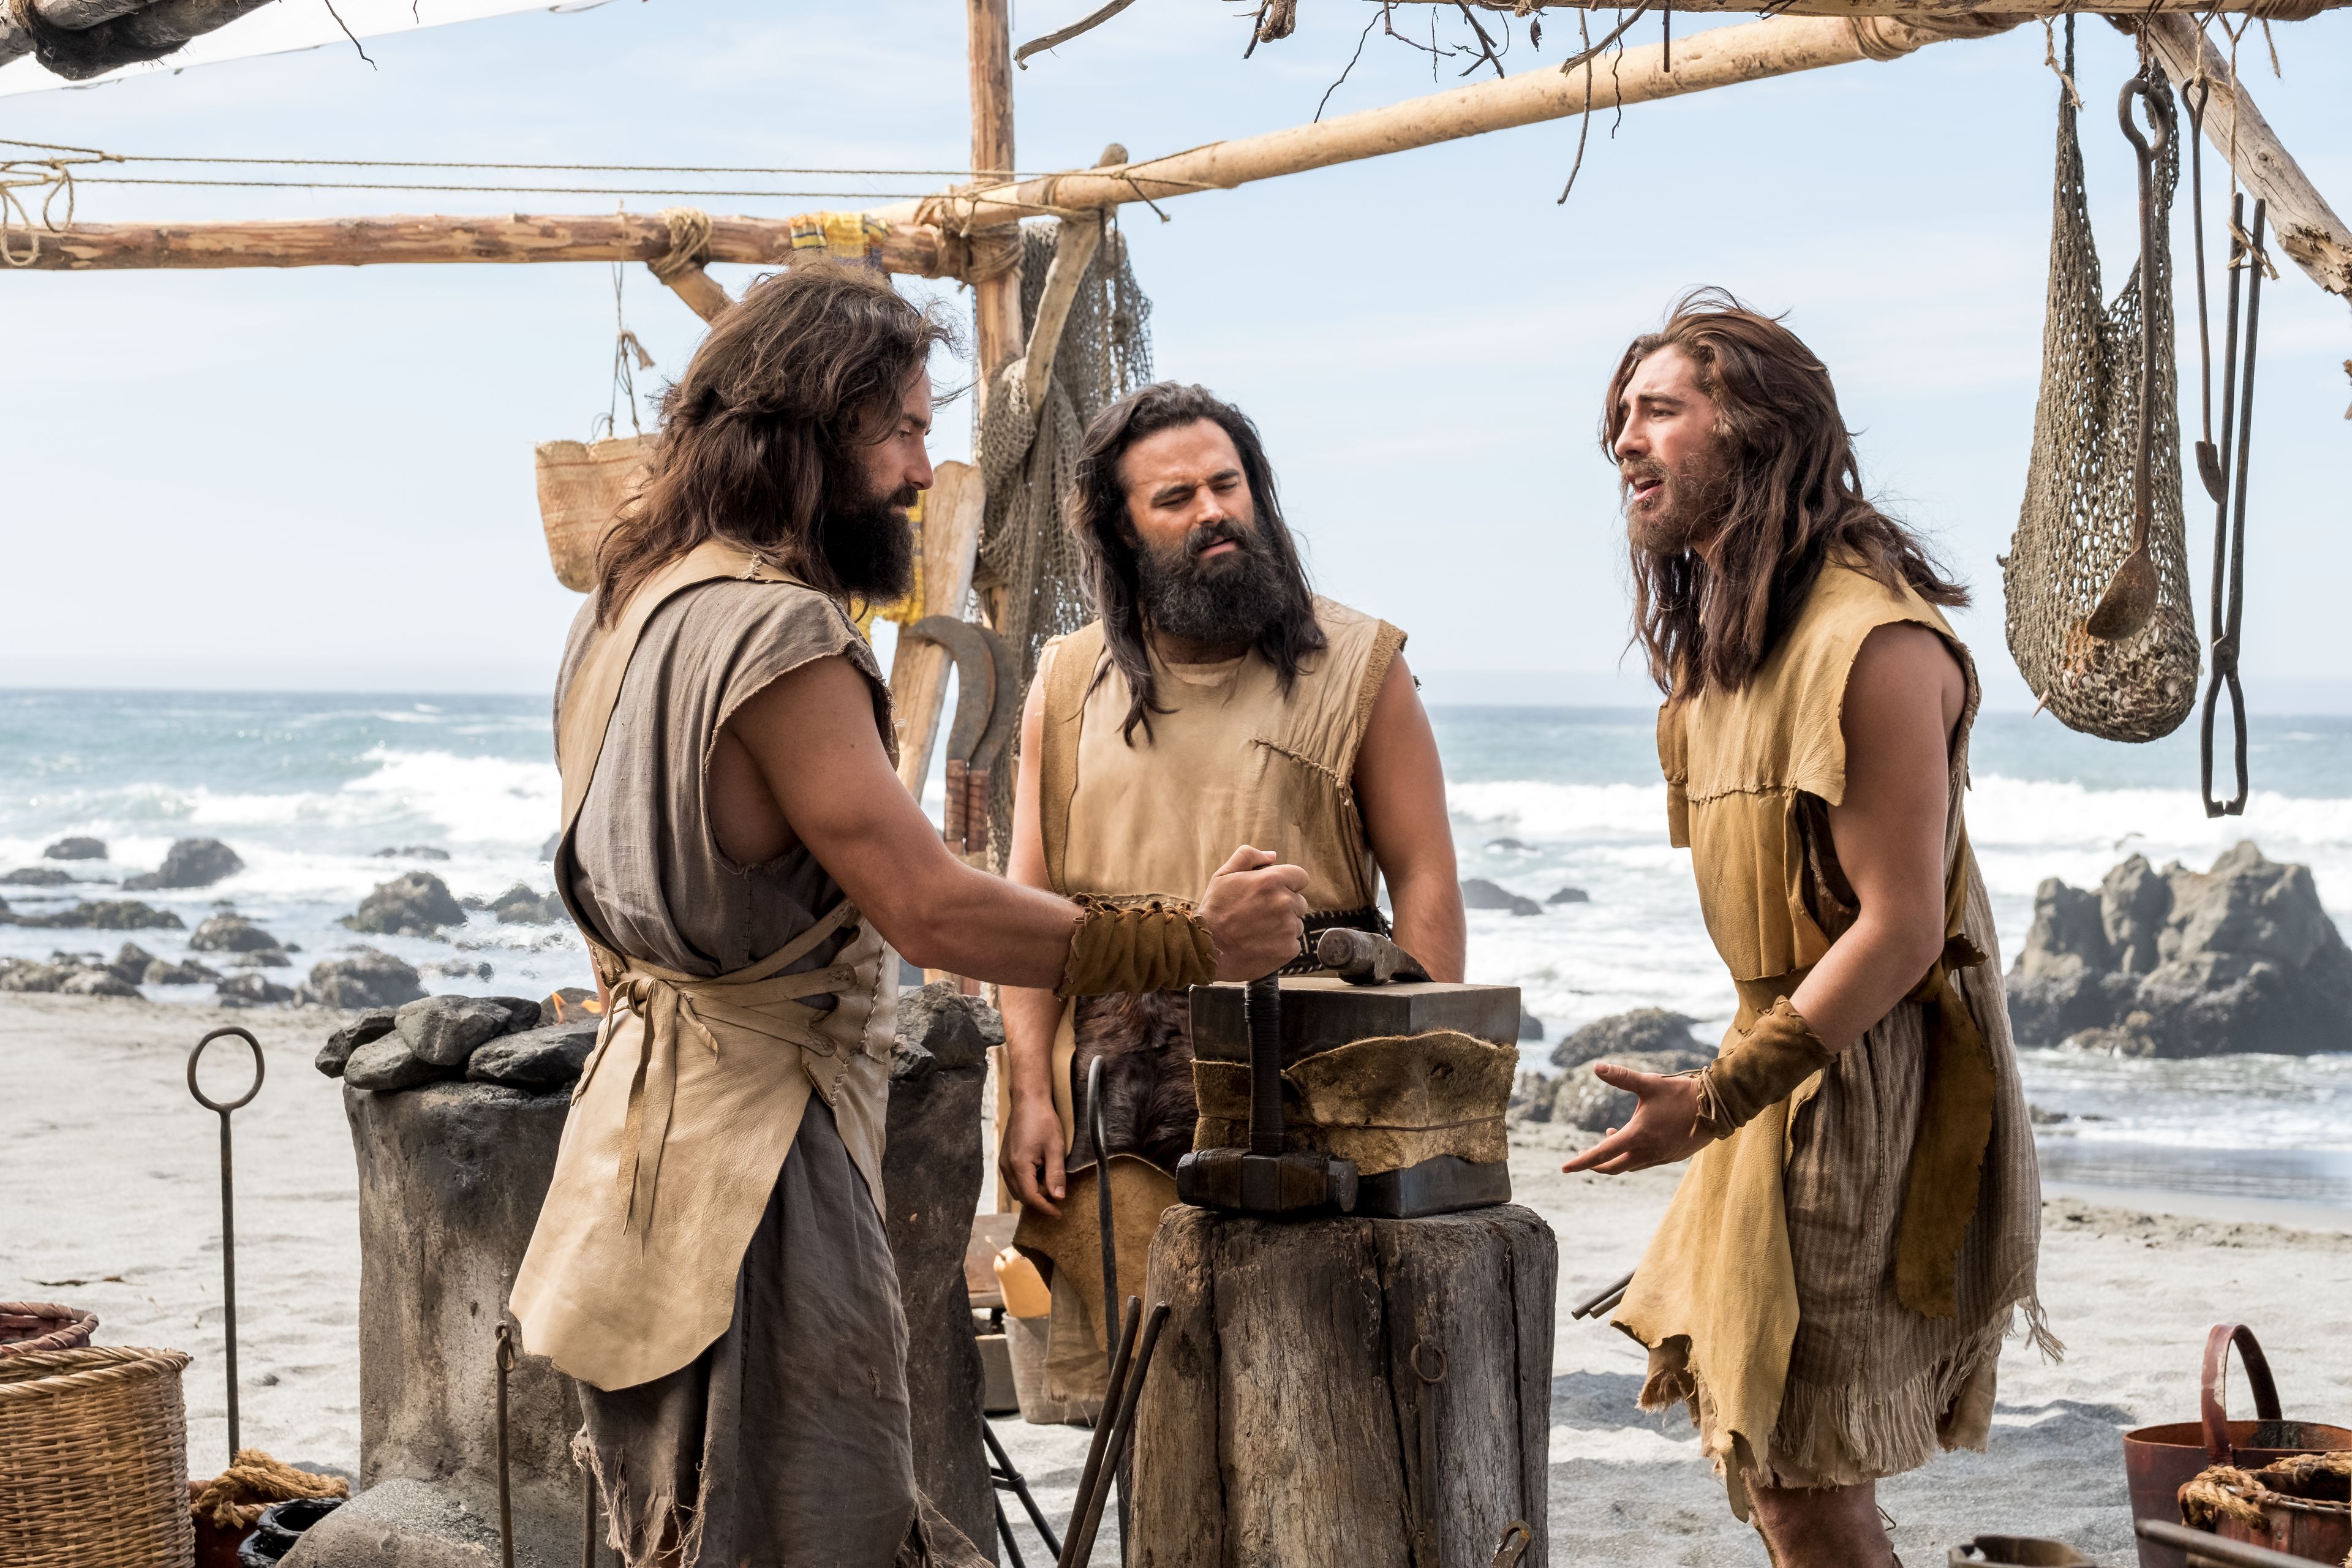 Nephi, Laman, and Lemuel contend about building a ship.